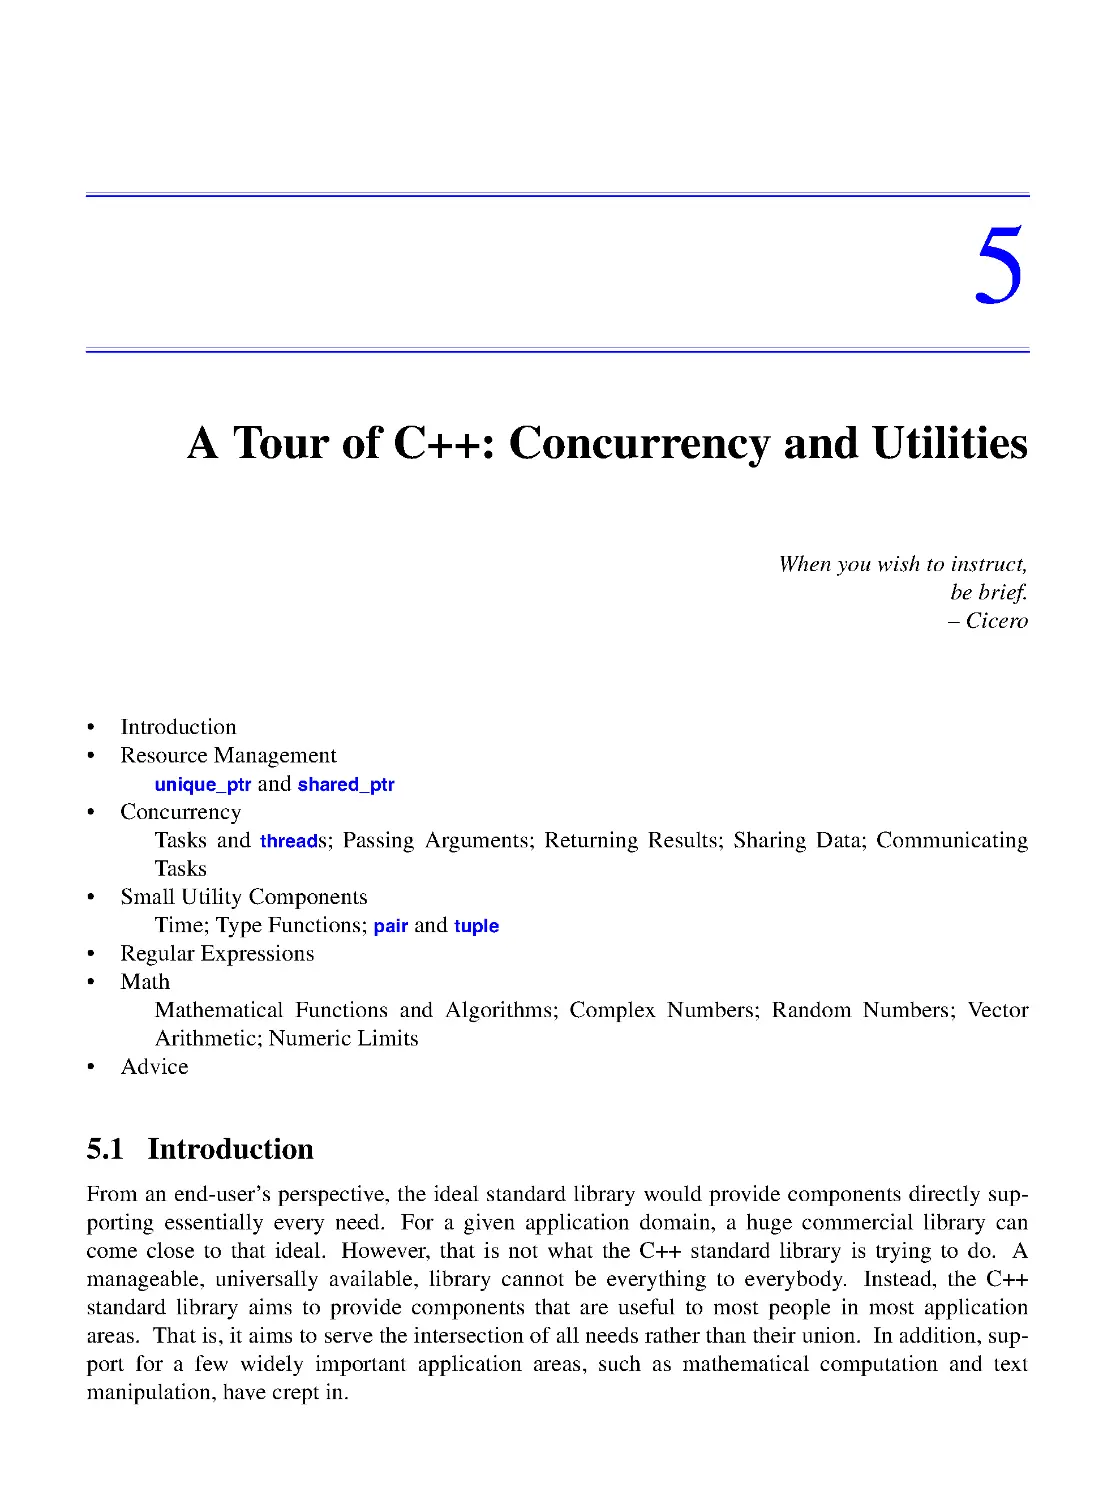 5. A Tour of C++: Concurrency and Utilities